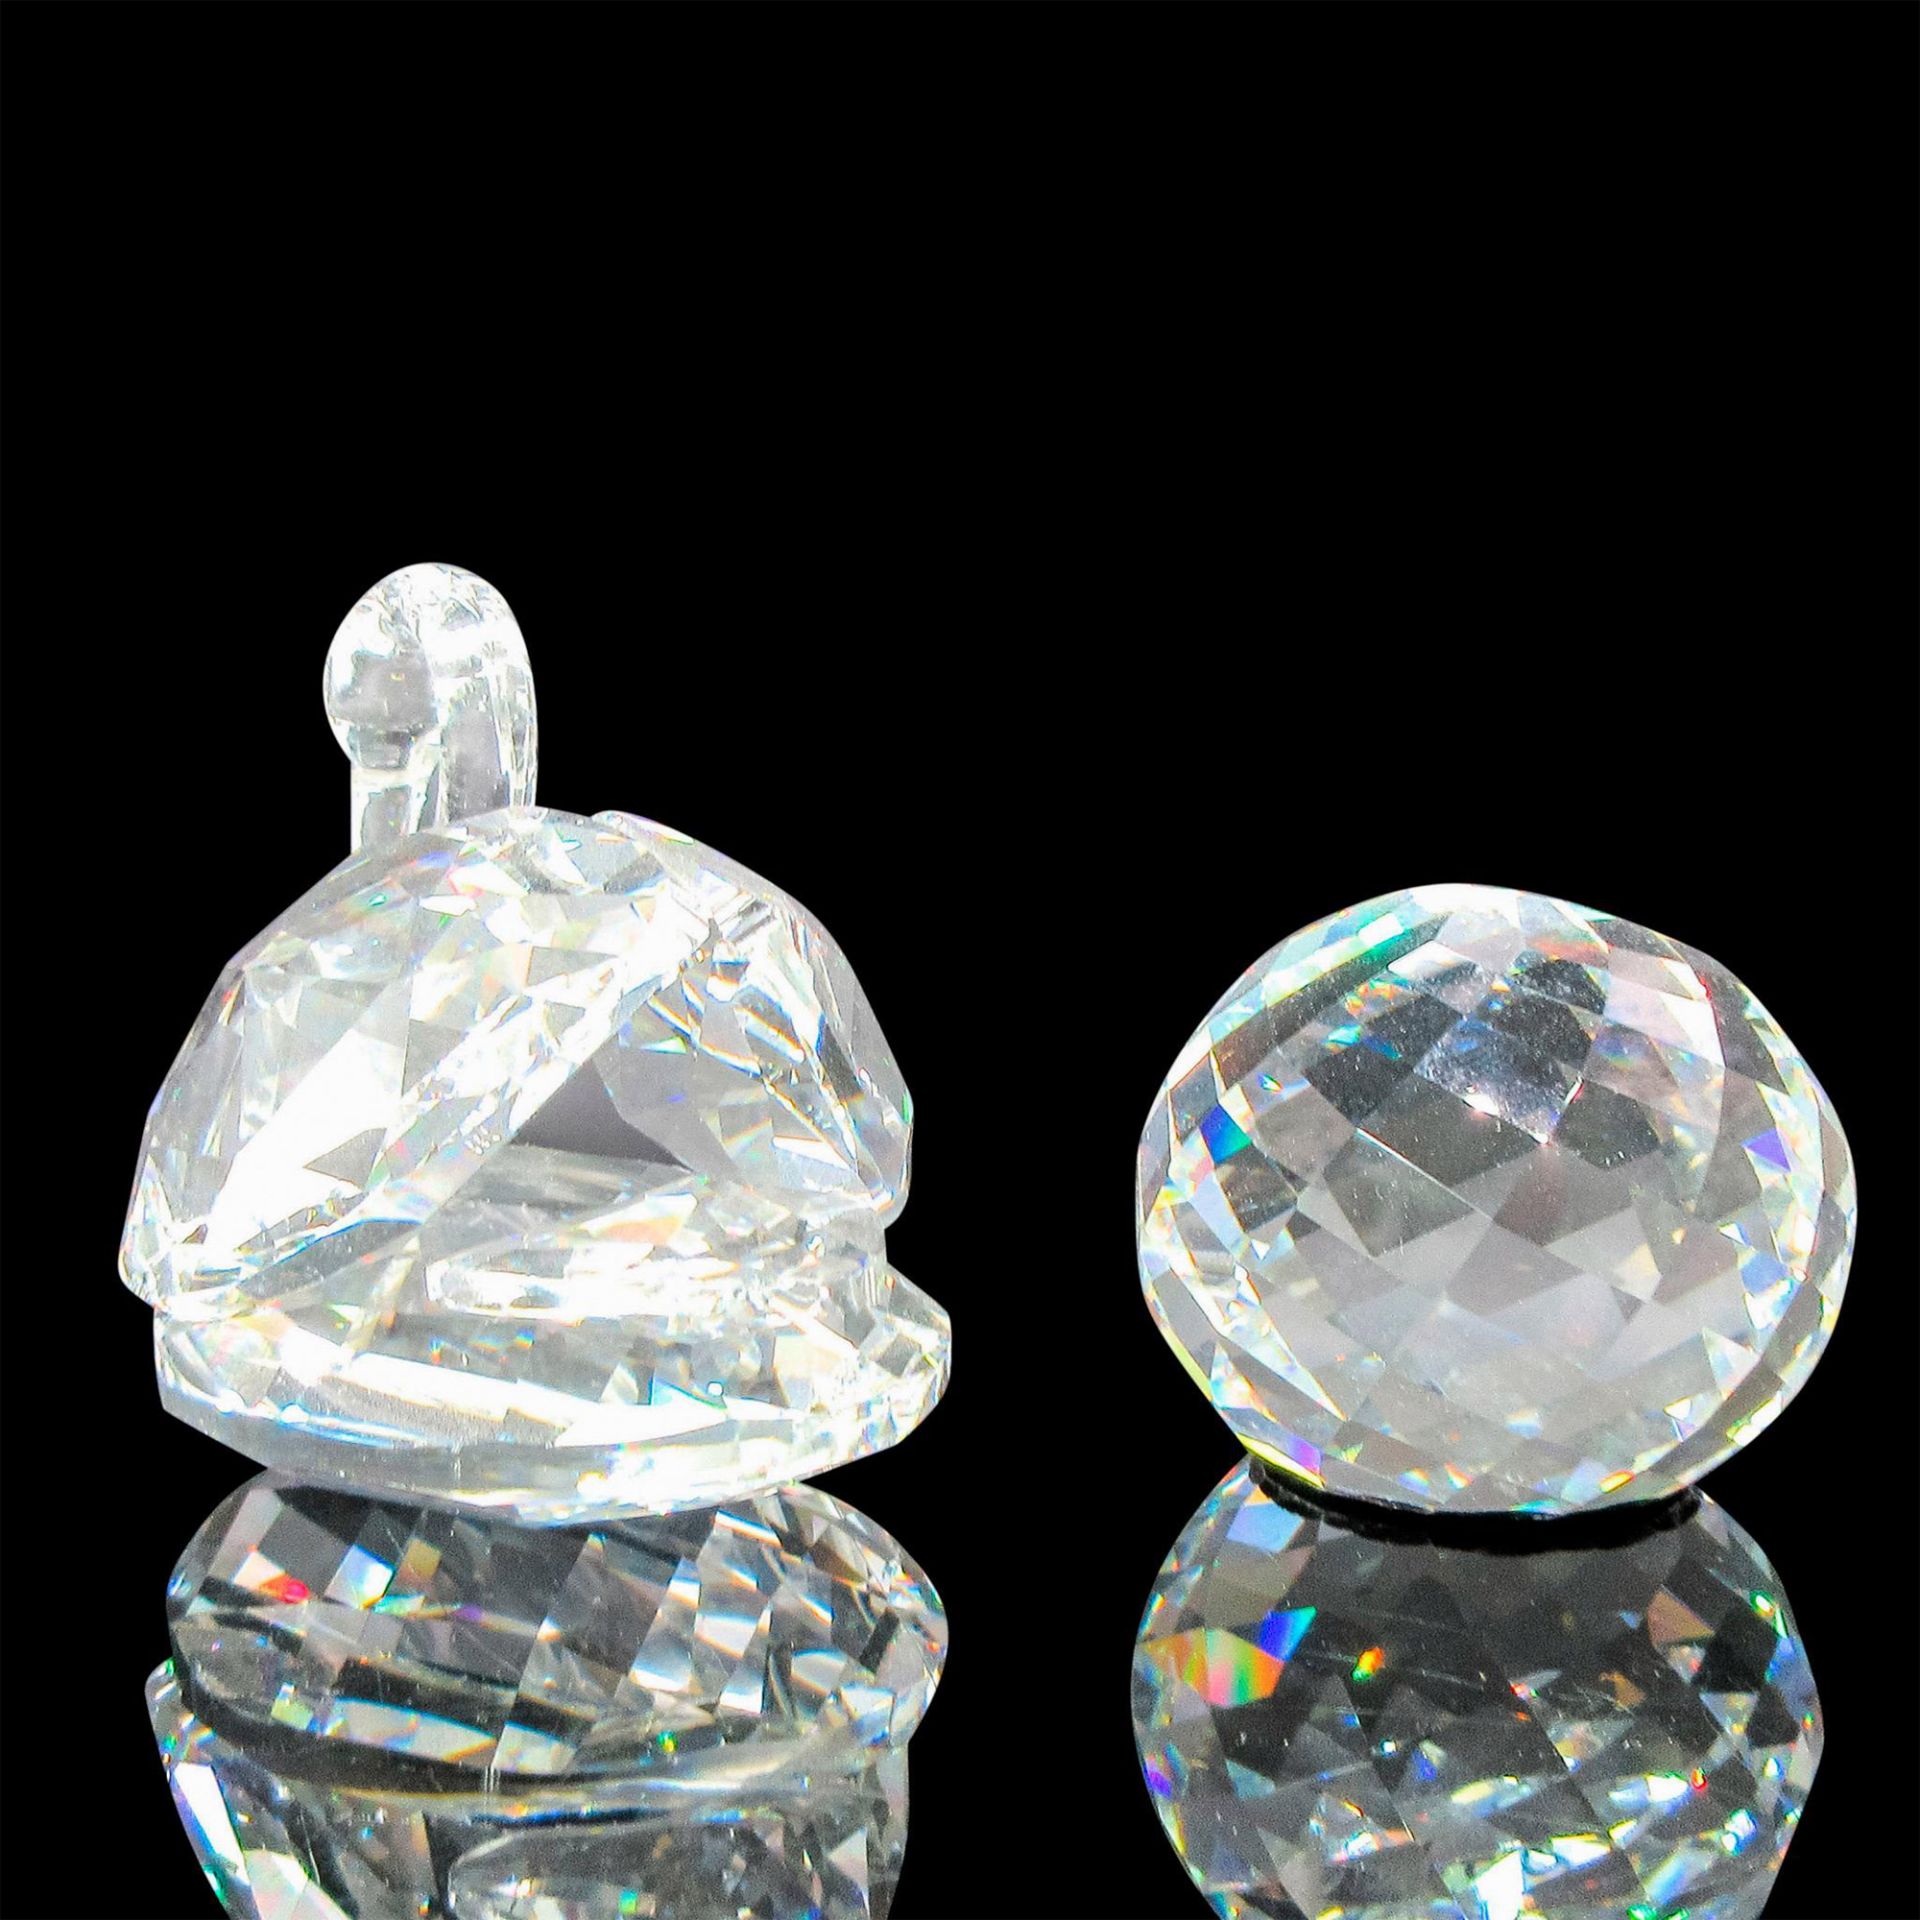 2pc Swarovski Crystal Large Swan Figurine and Paperweight - Image 2 of 4